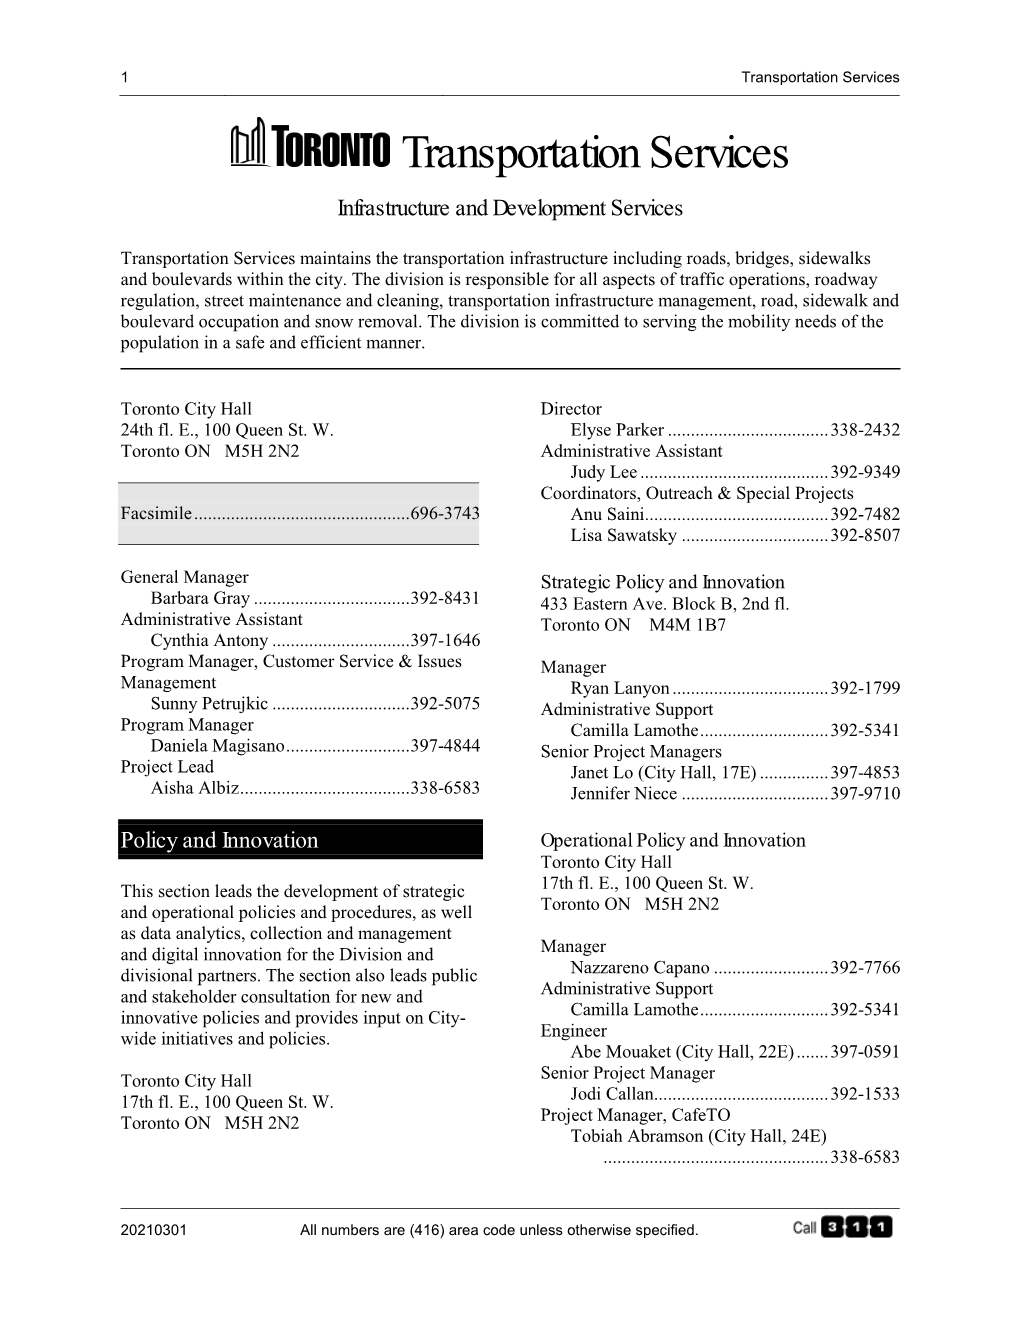 Transportation Services Telephone Directory